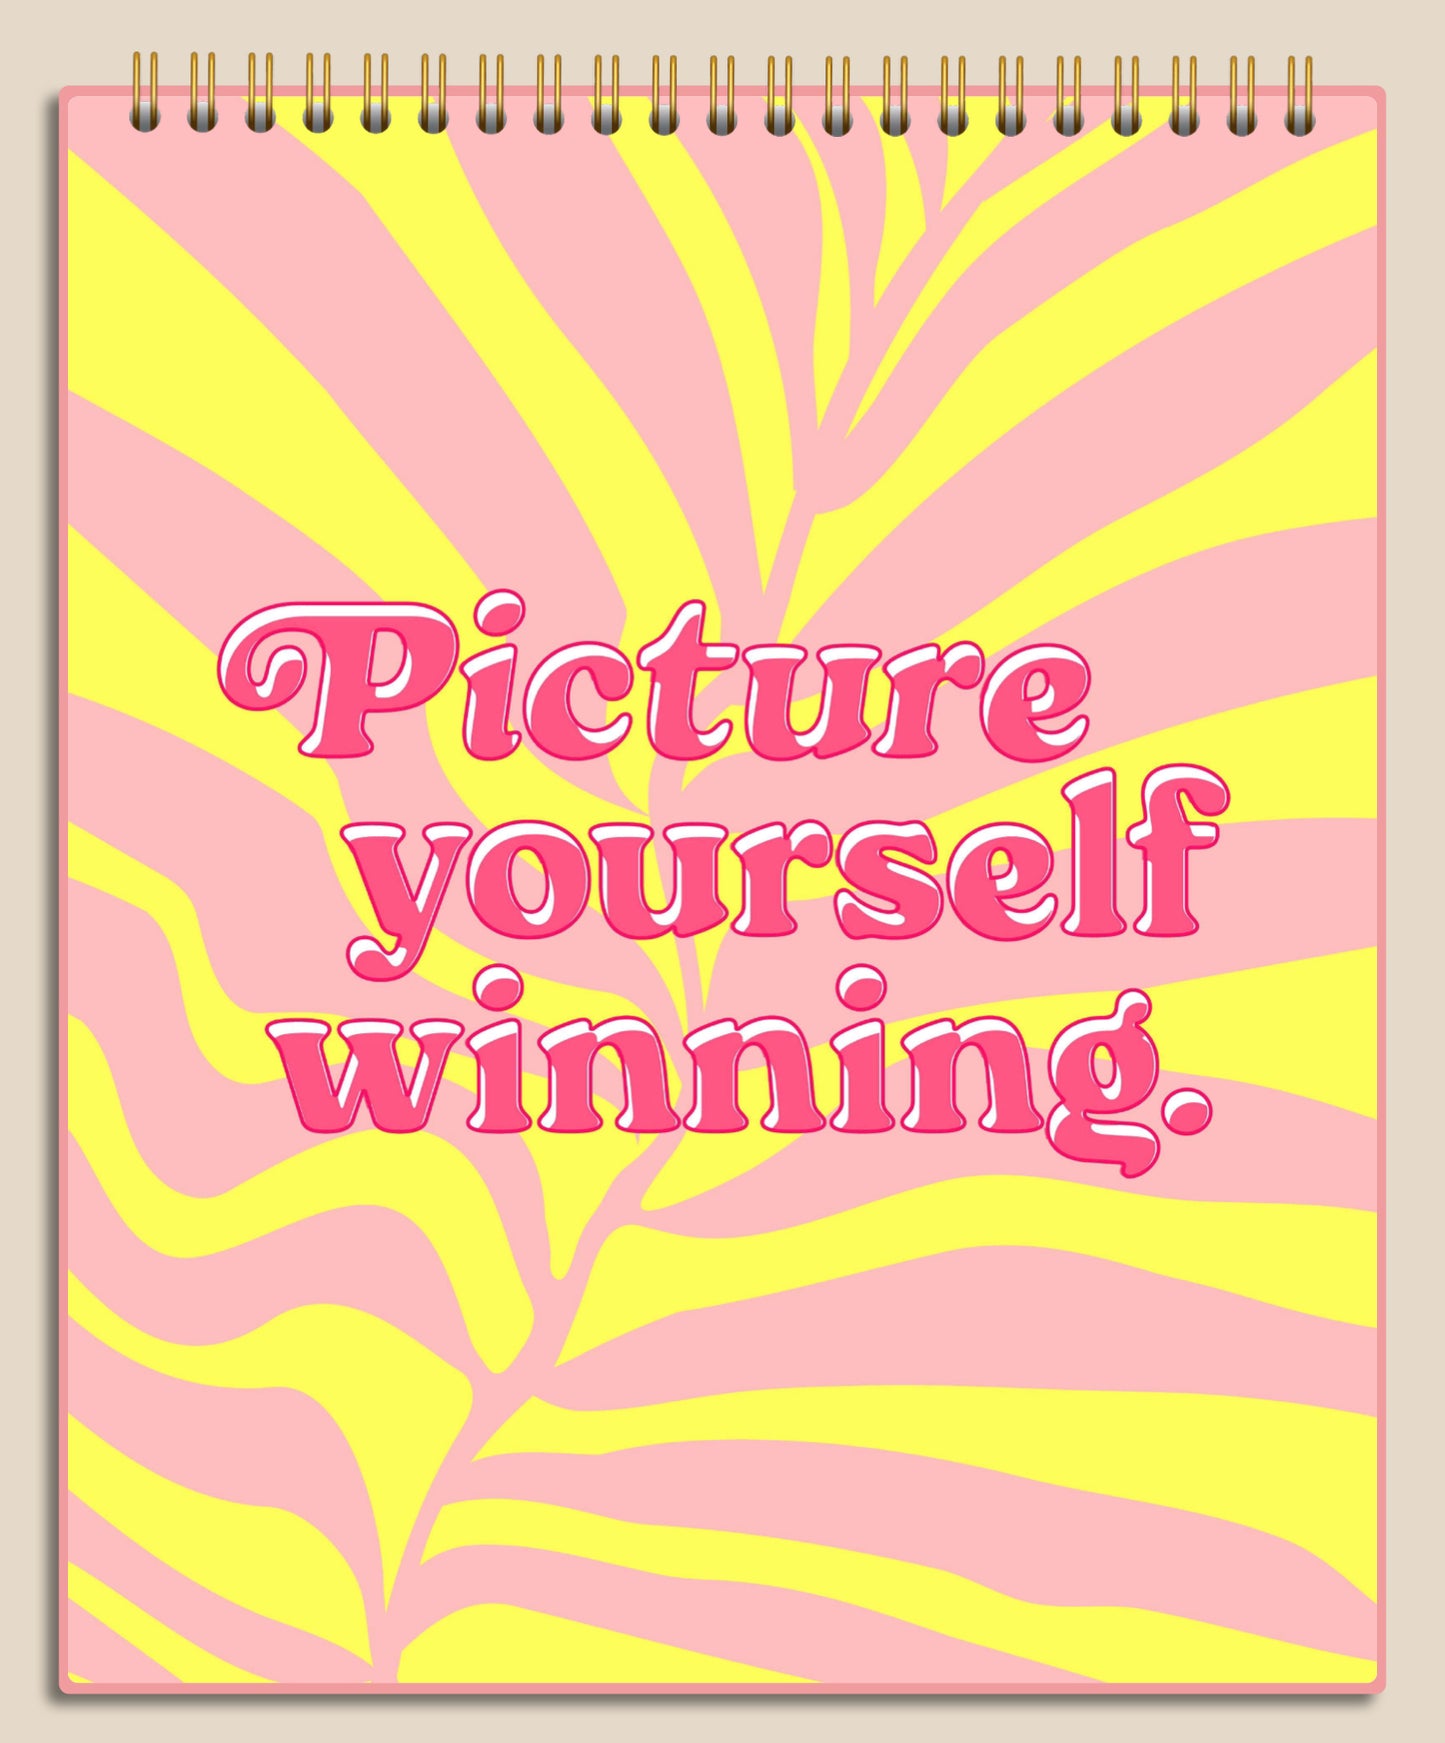 The Digital "Picture Yourself Winning" Task Pad